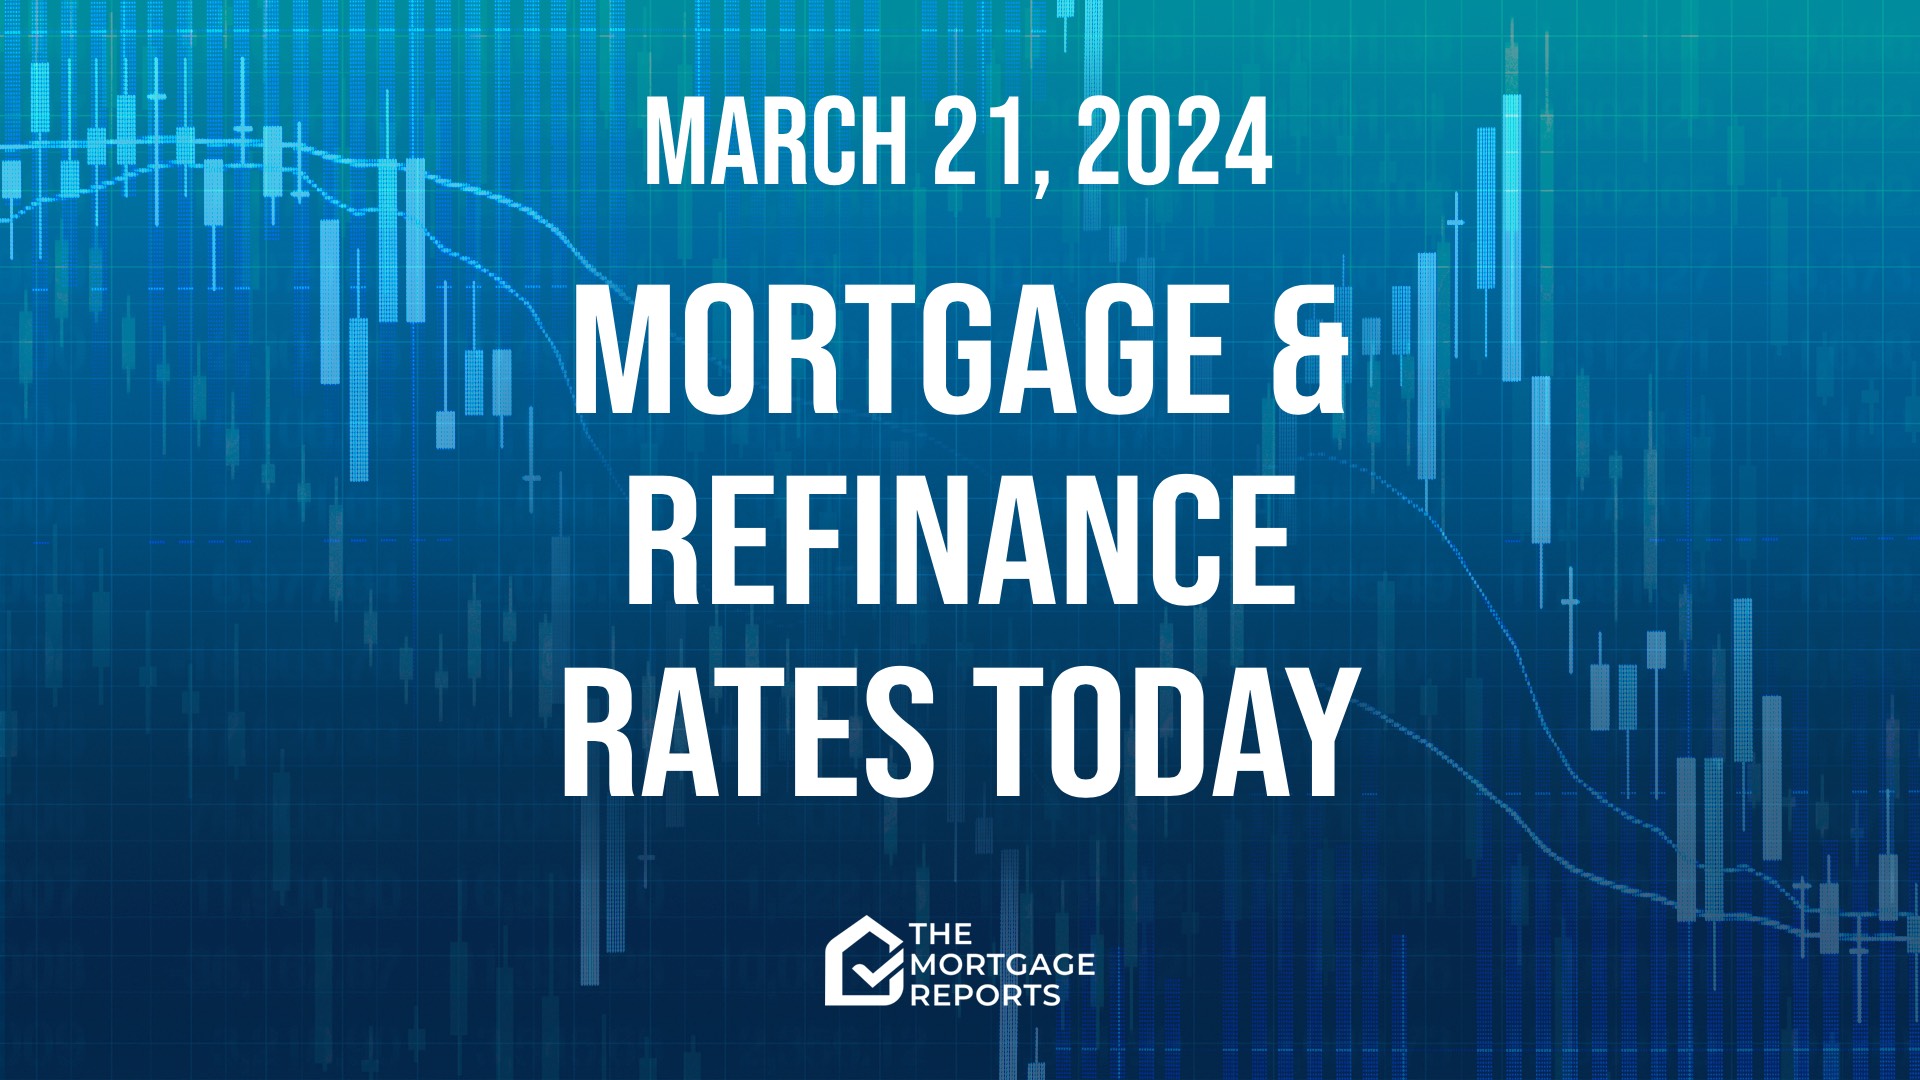 Mortgage rates today, Mar. 21, 2024